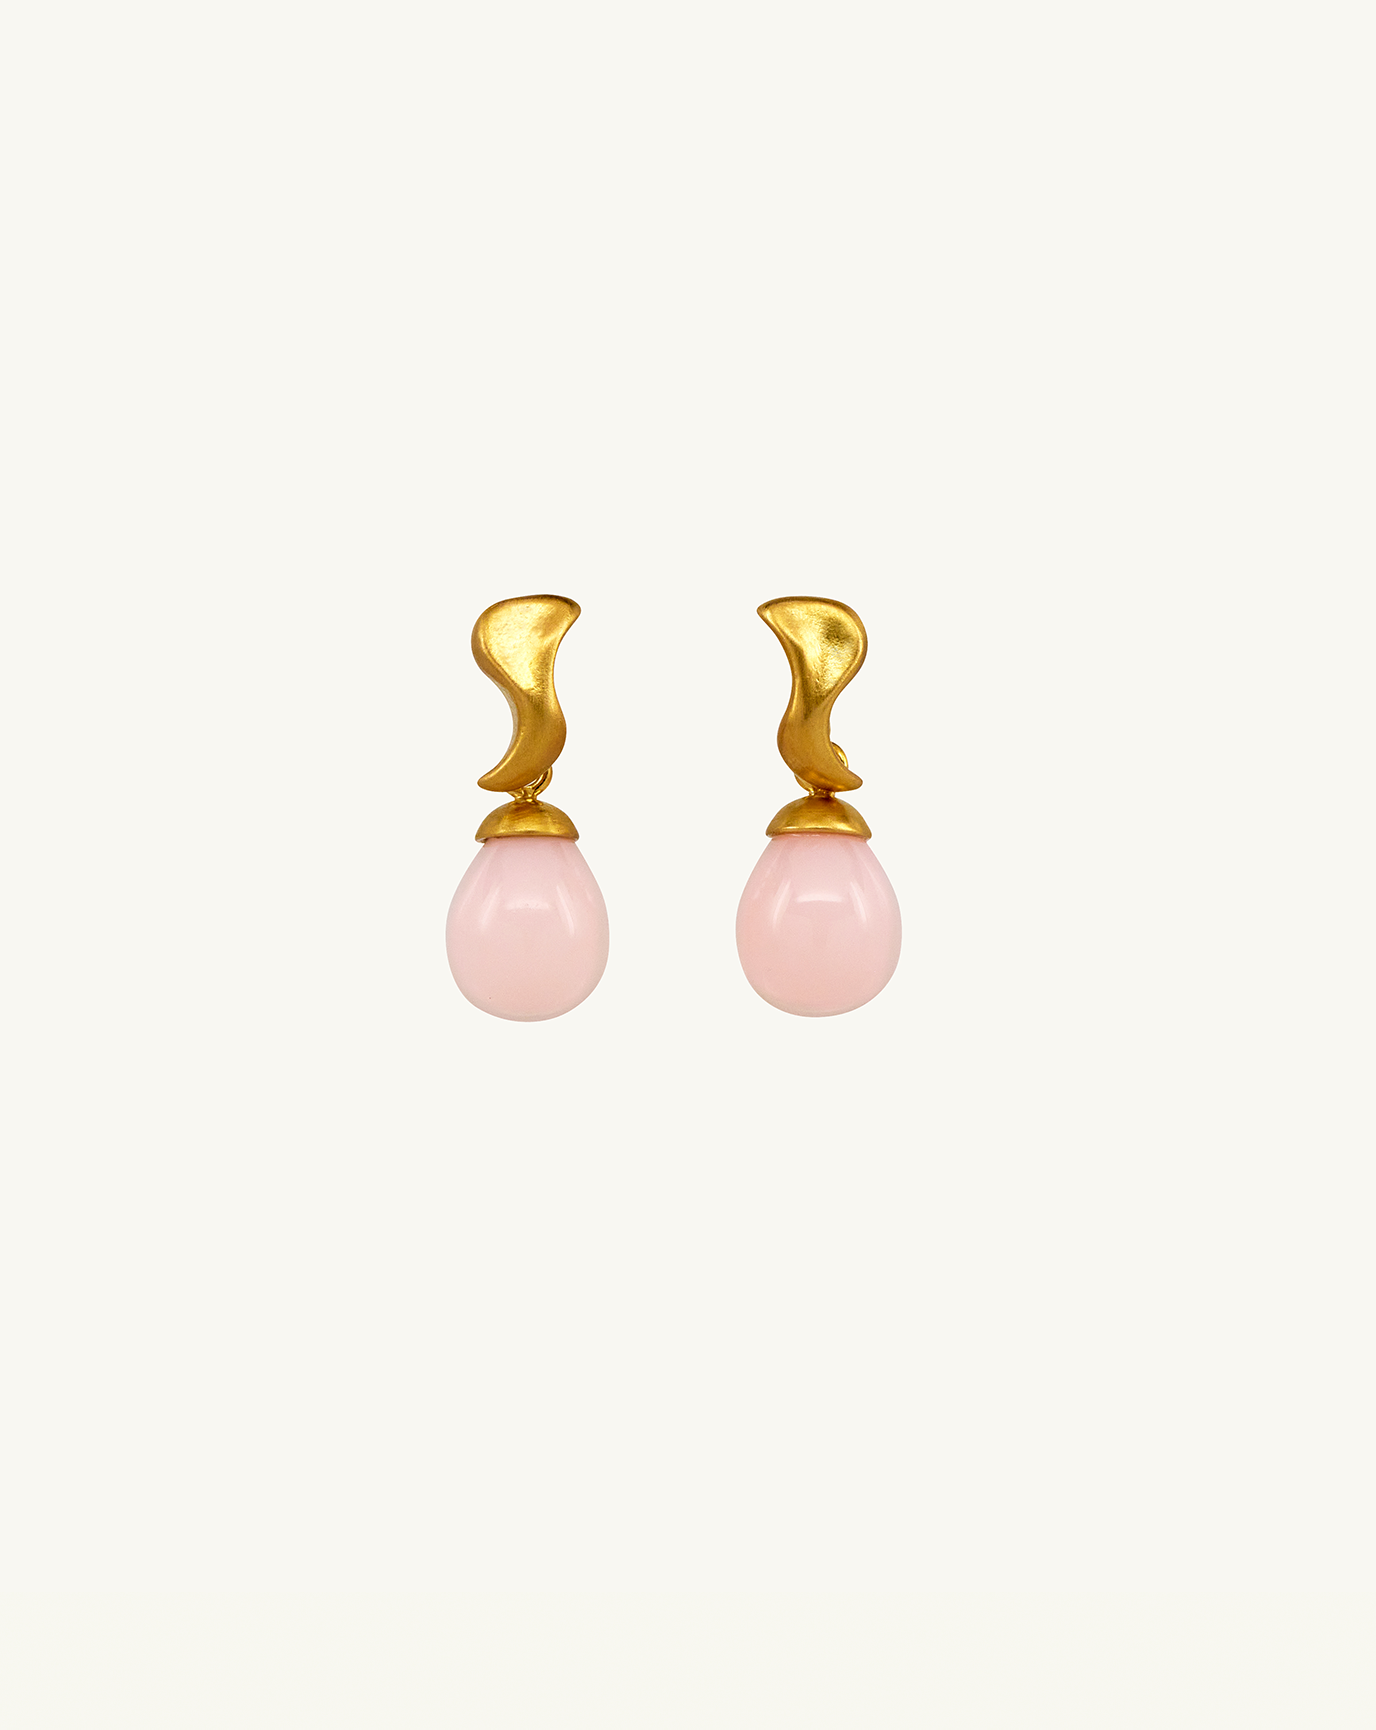 Cut out image of i seira gold and gemstone earrings